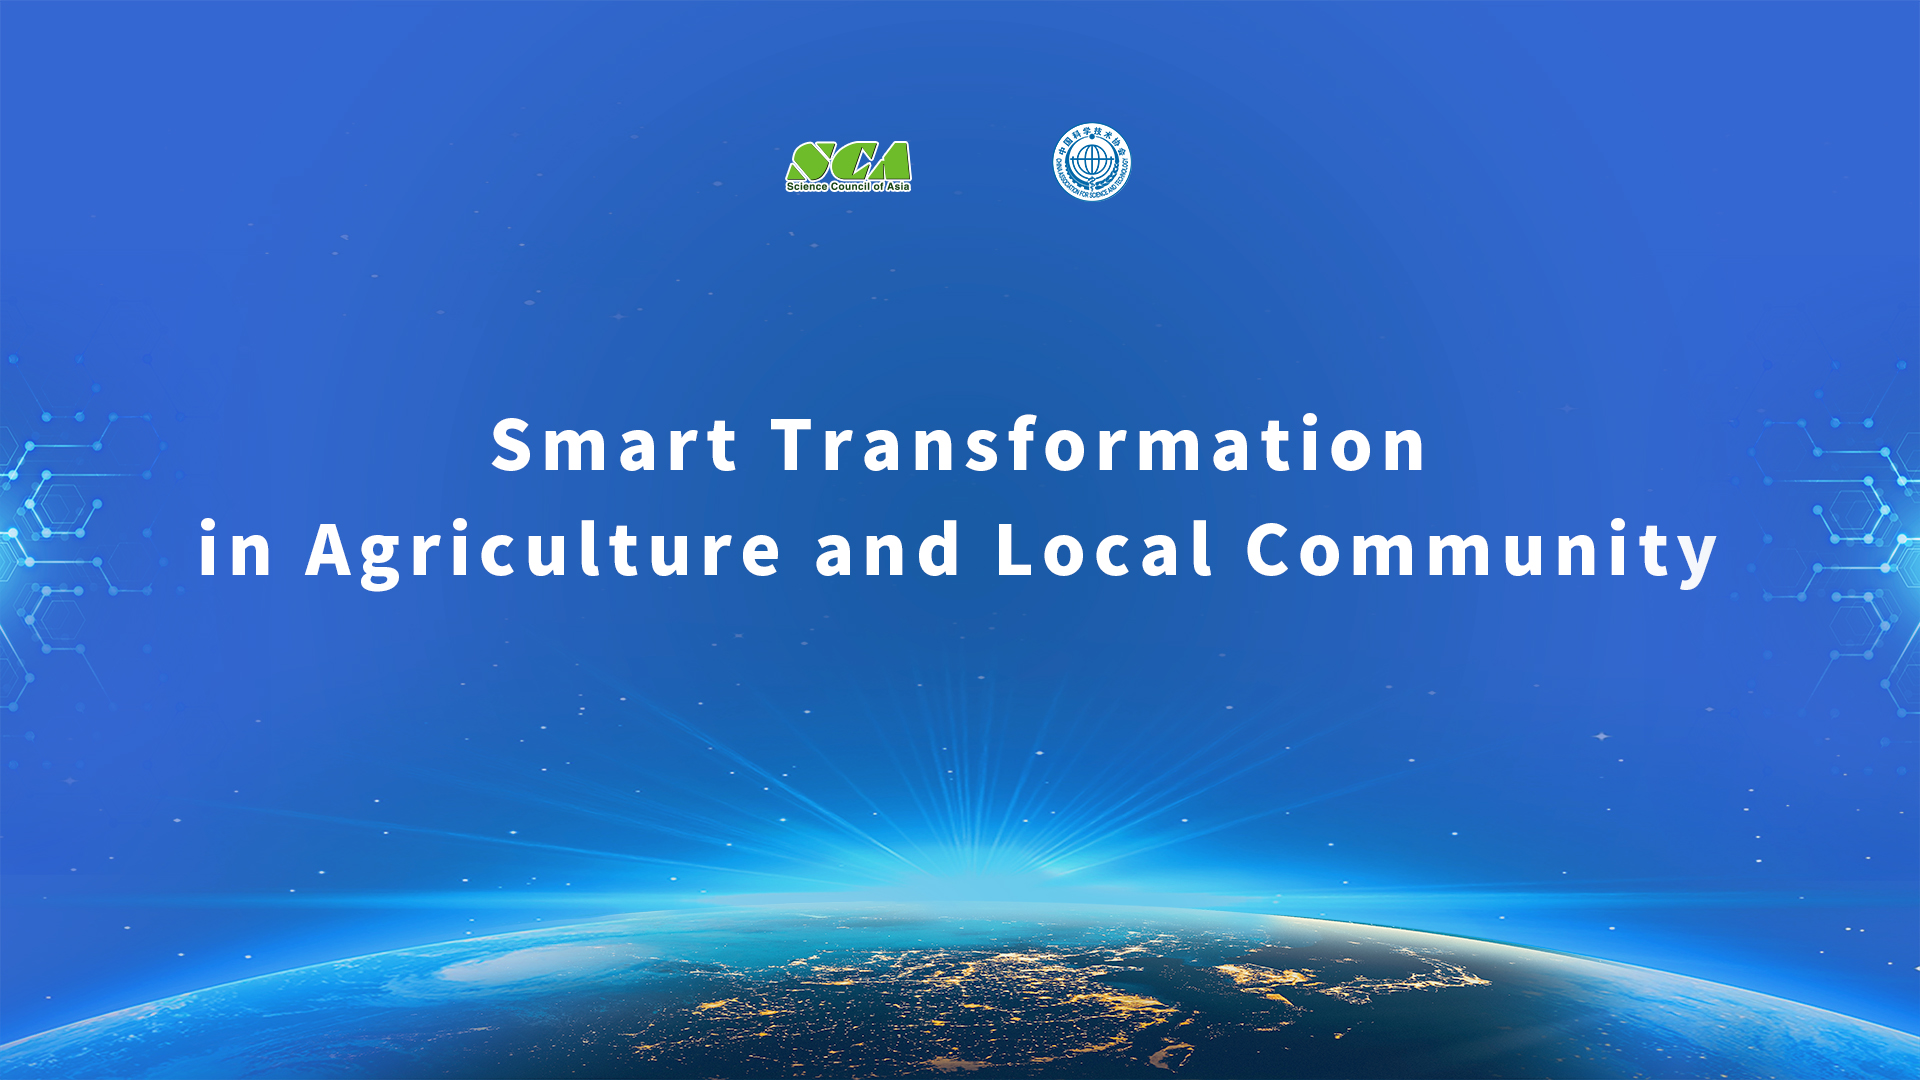 Session 4: Smart Transformation in Agriculture and Local Community